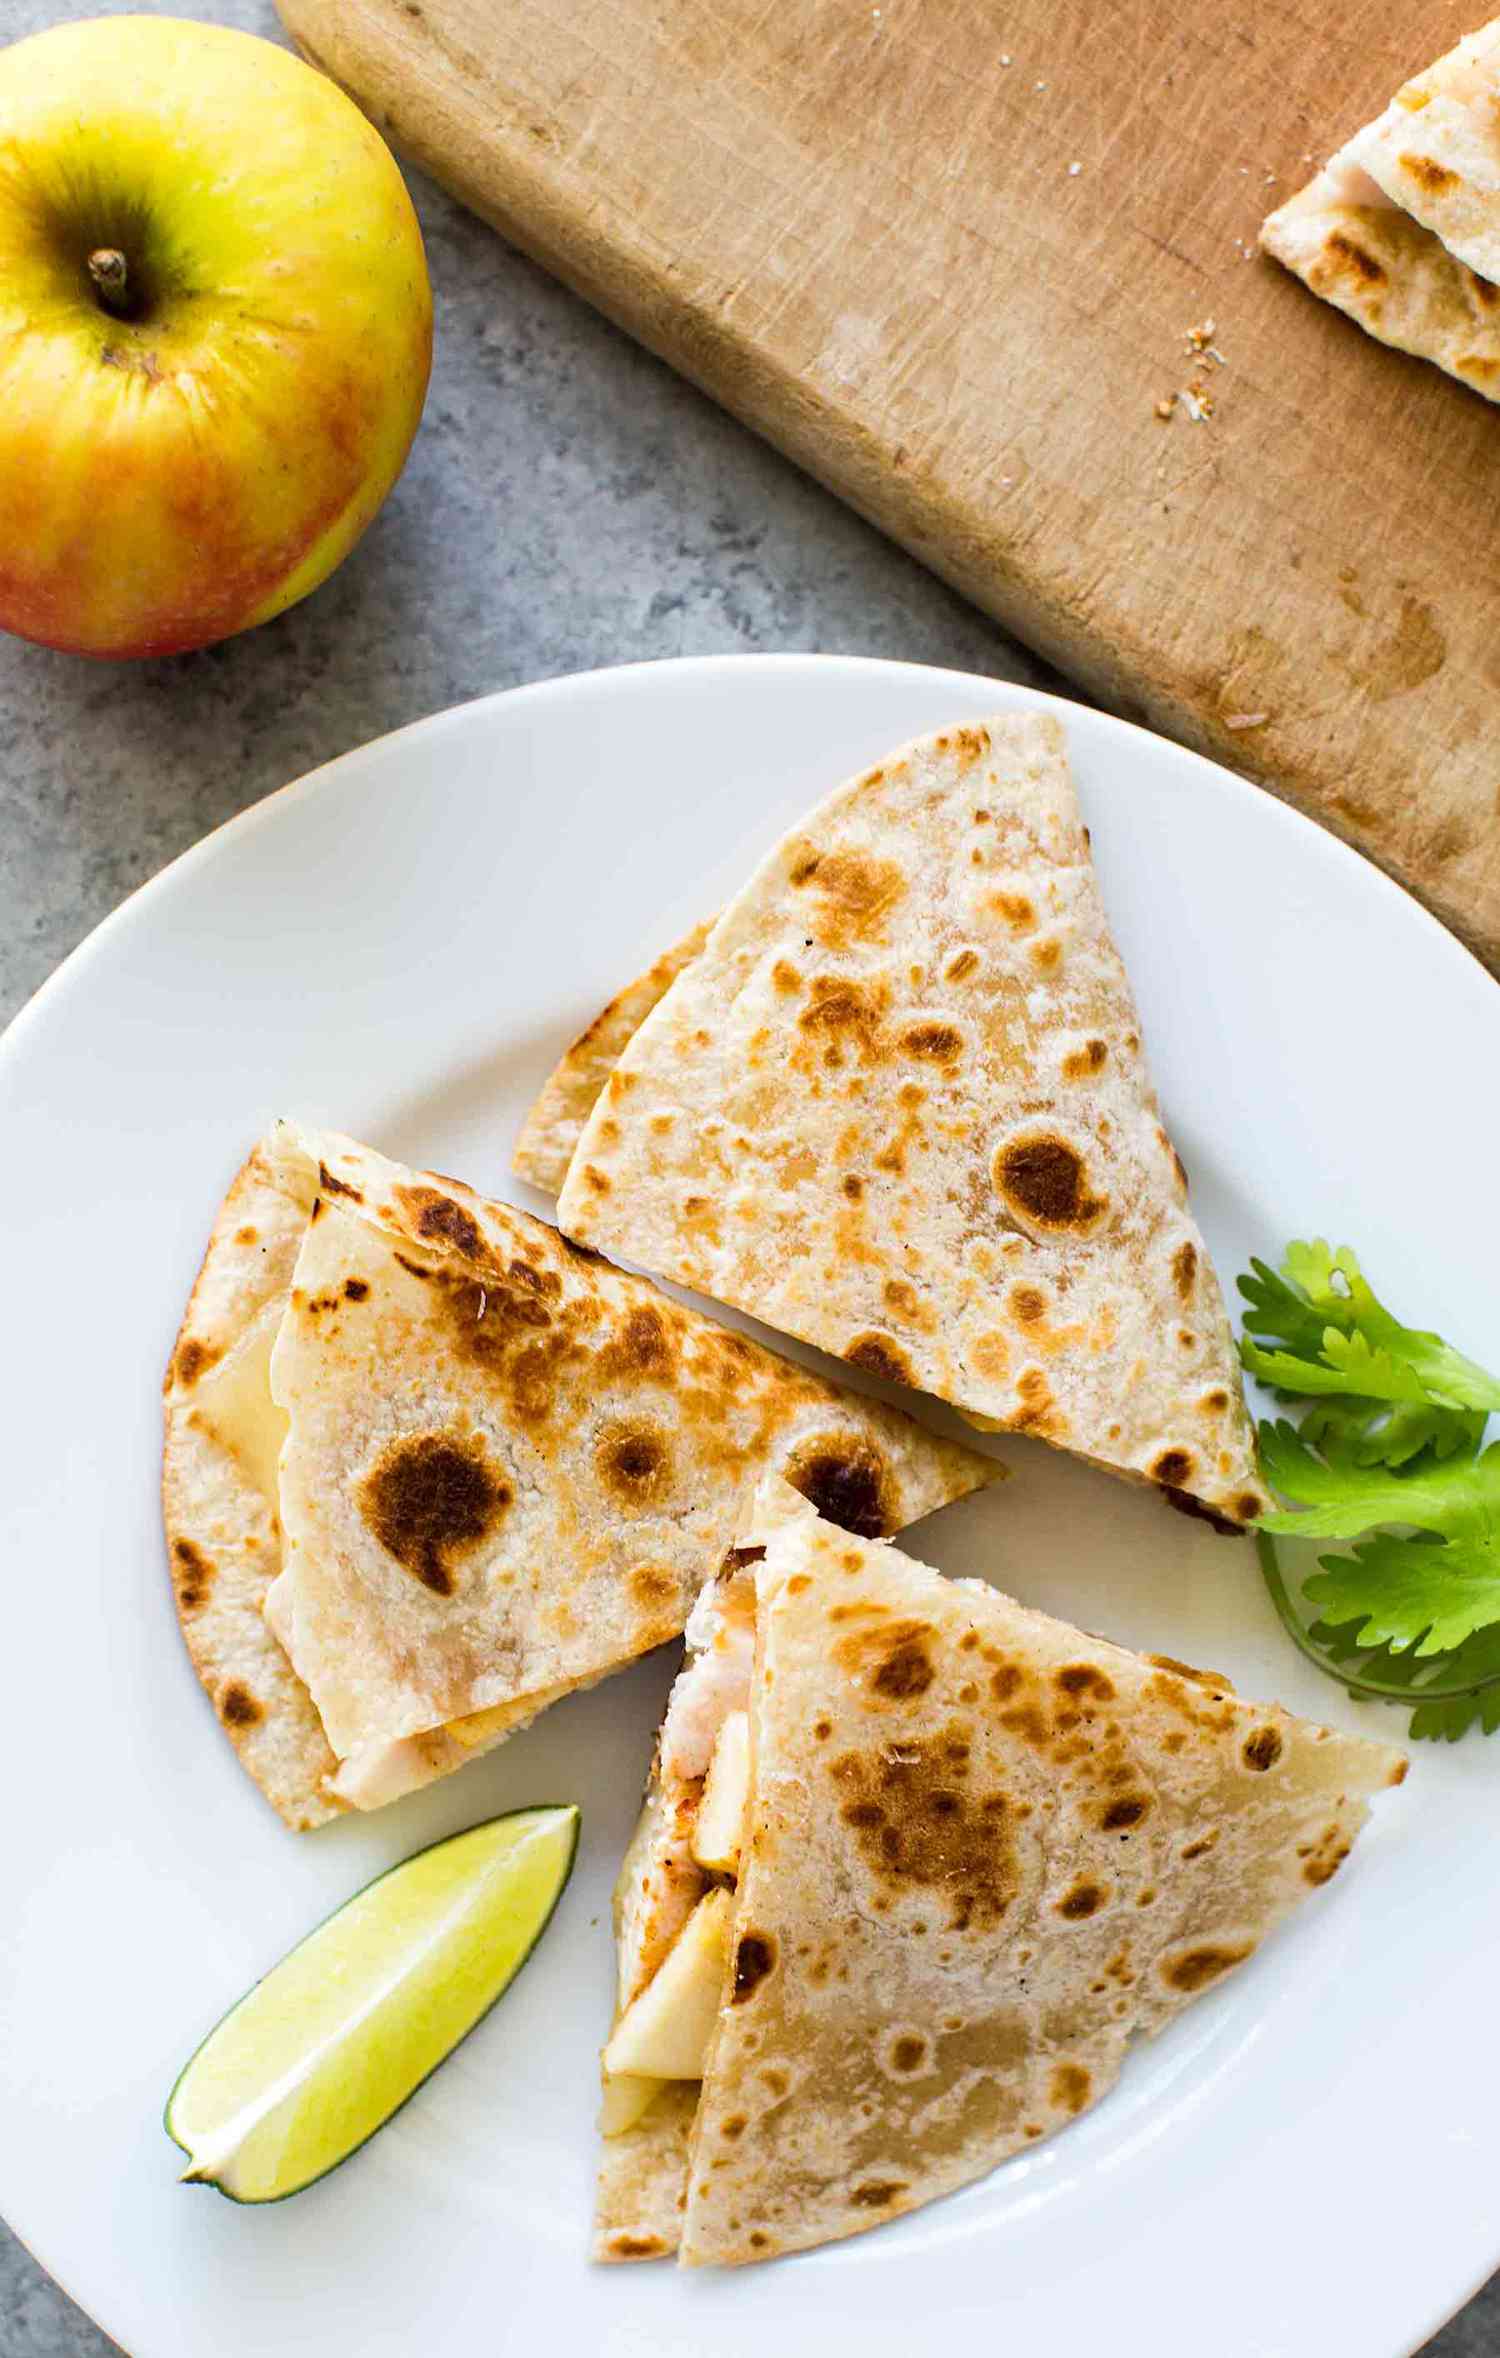 Gouda quesadillas with caramelised apples and onions